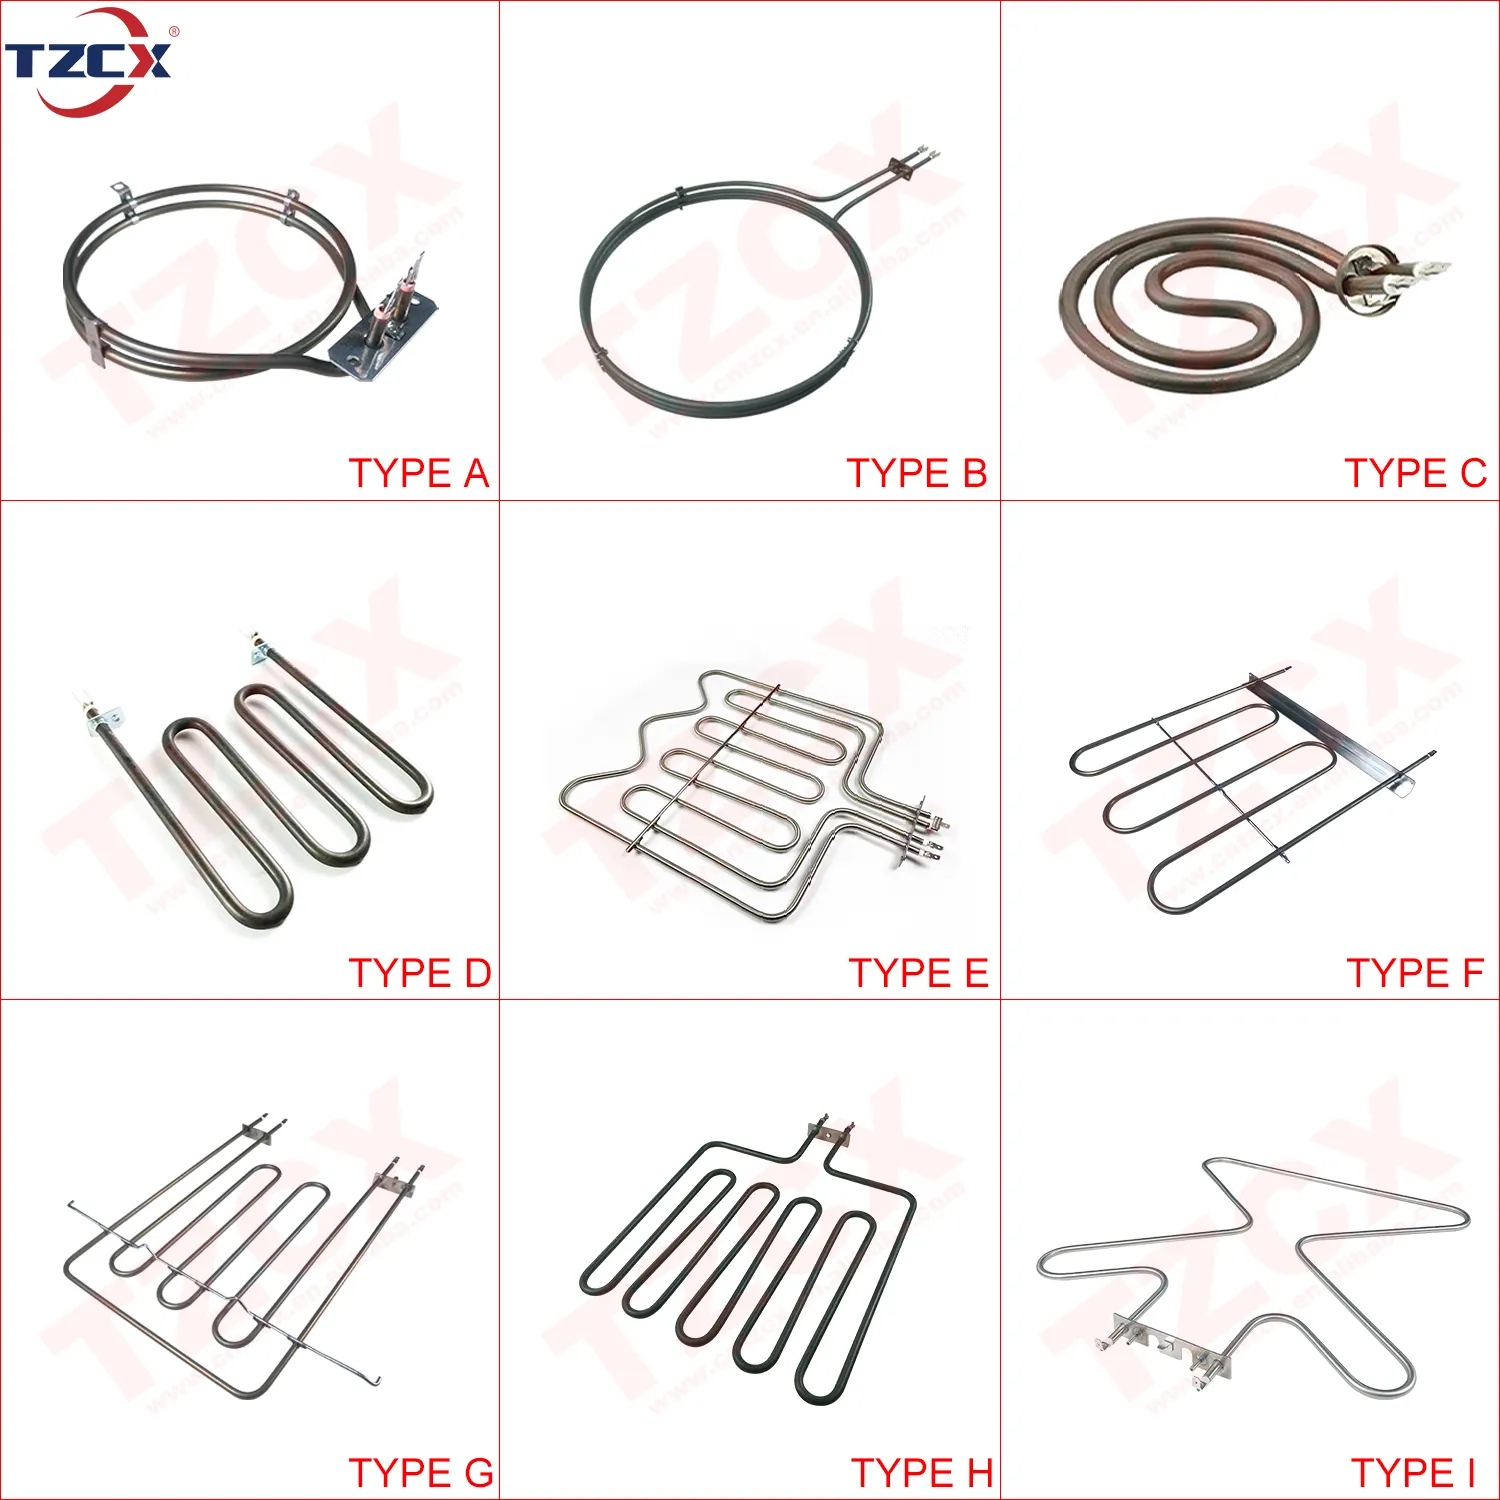 CE certified TZCX brand customized different watt and voltage round air heater oven heating element